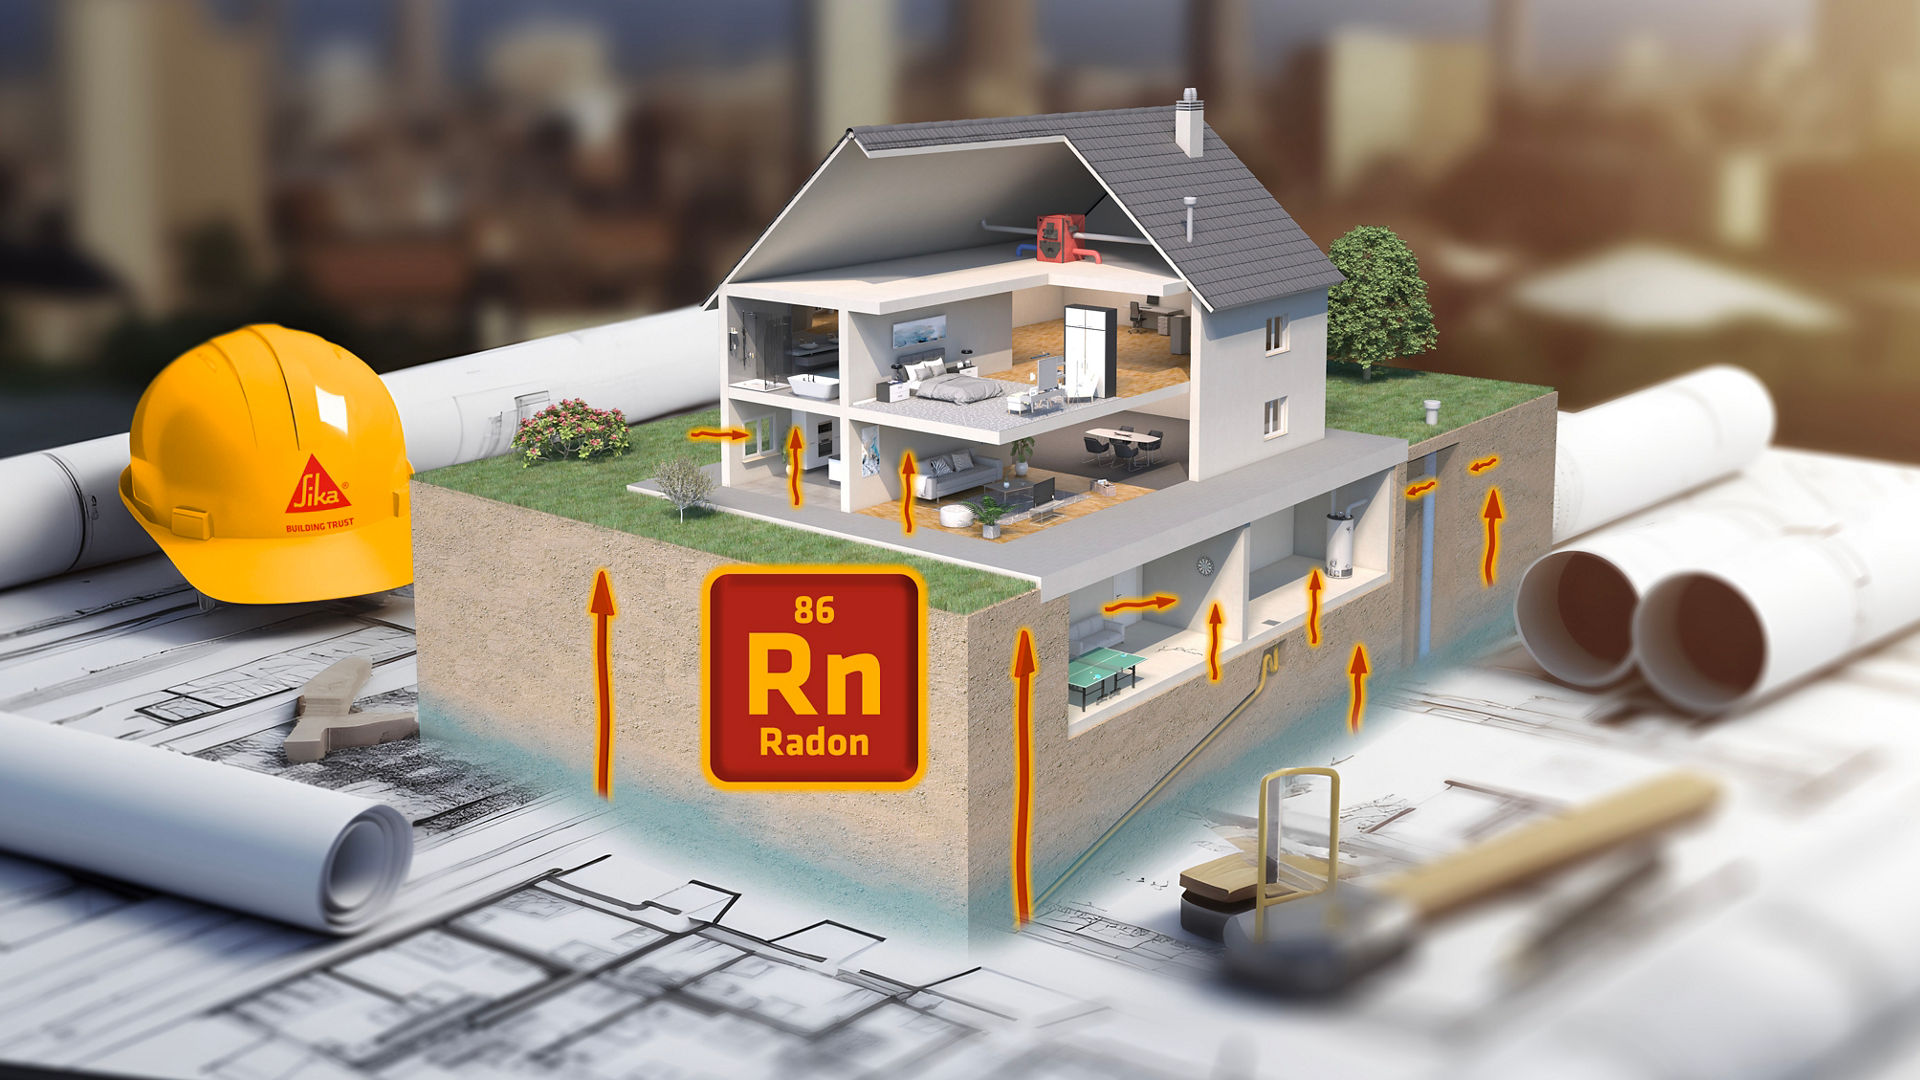 3D rendering of a desk with blueprints and a hard hat on top. A residential house emerging from the blueprints, showing the possible ingress points of Radon gas into the house.